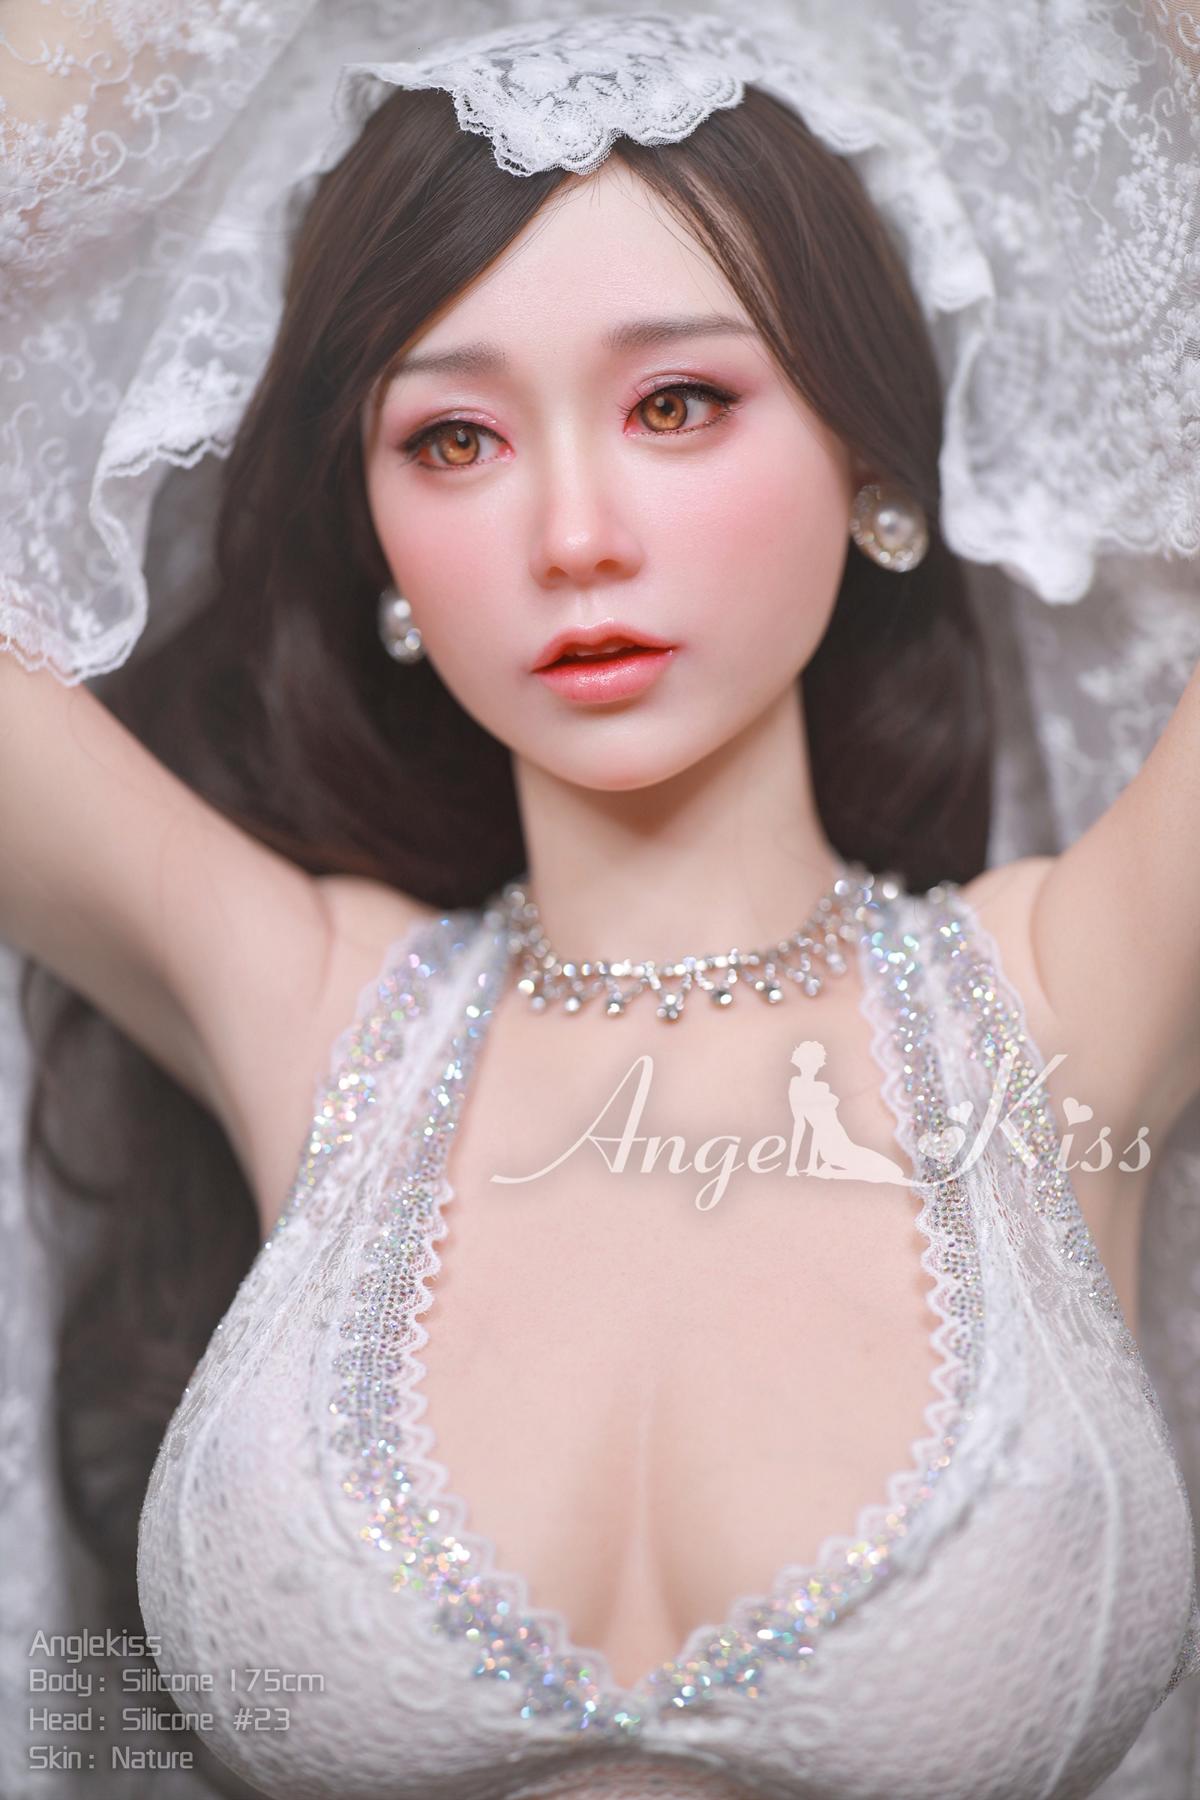 Silicone Sex Doll Li | Chinese Top Model